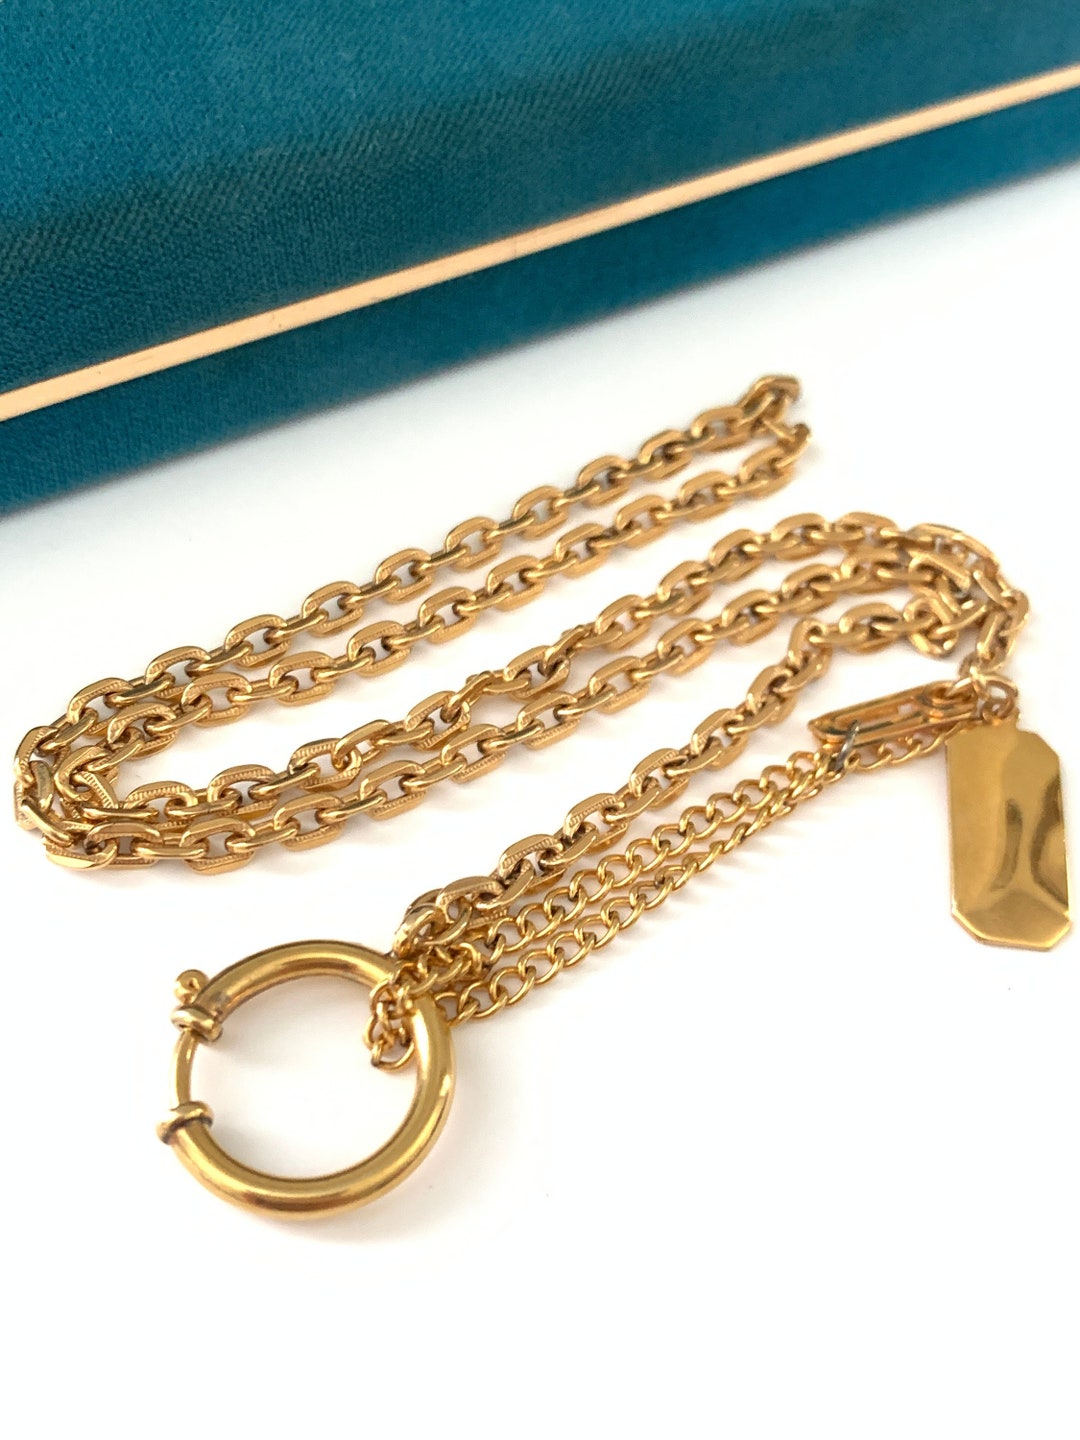 Vintage 19 Gold Filled Mini Biker Chain Necklace With 